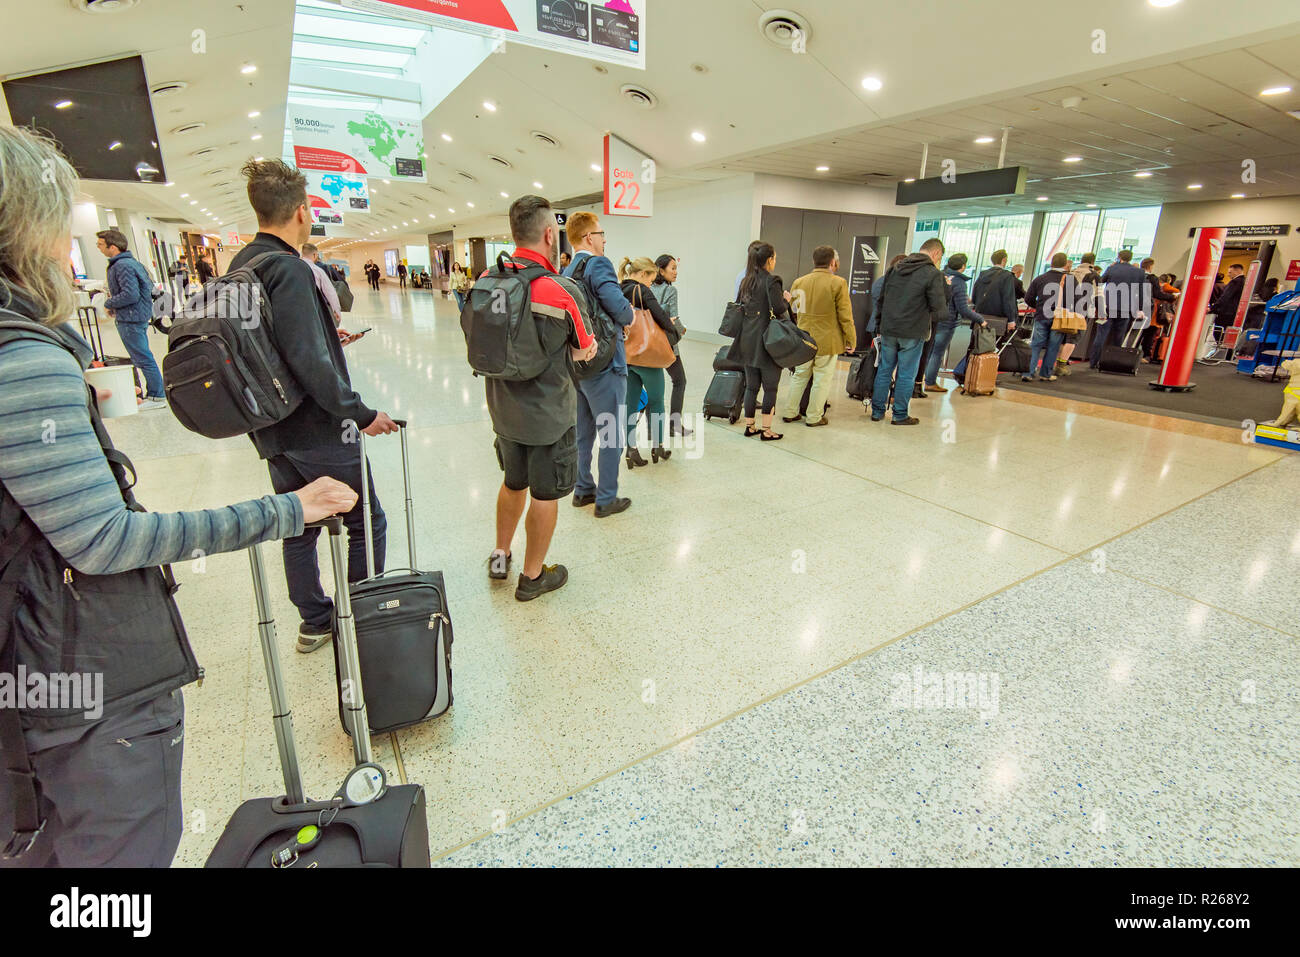 People lined up waiting to board a domestic flight at Melbourne's Tullamarine airport in Australia Stock Photo